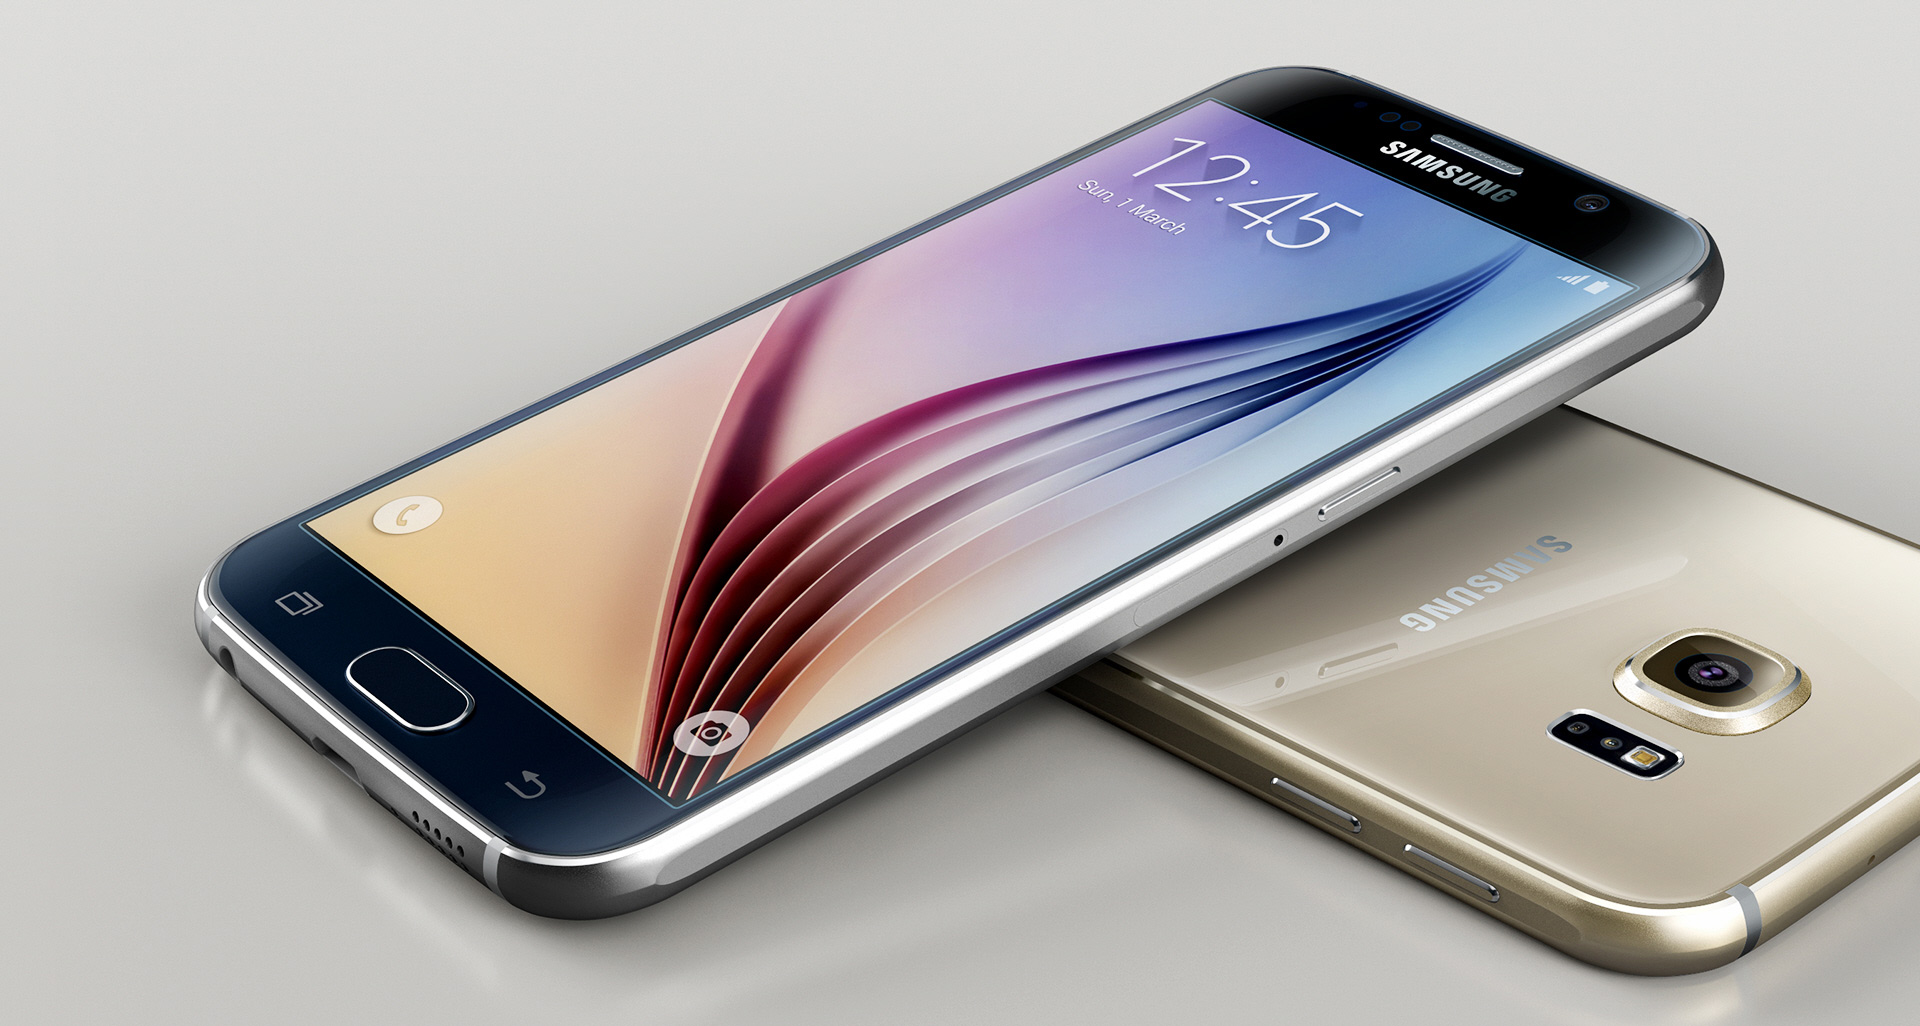 Samsung Galaxy S6-S6 Edge-Android 6.0